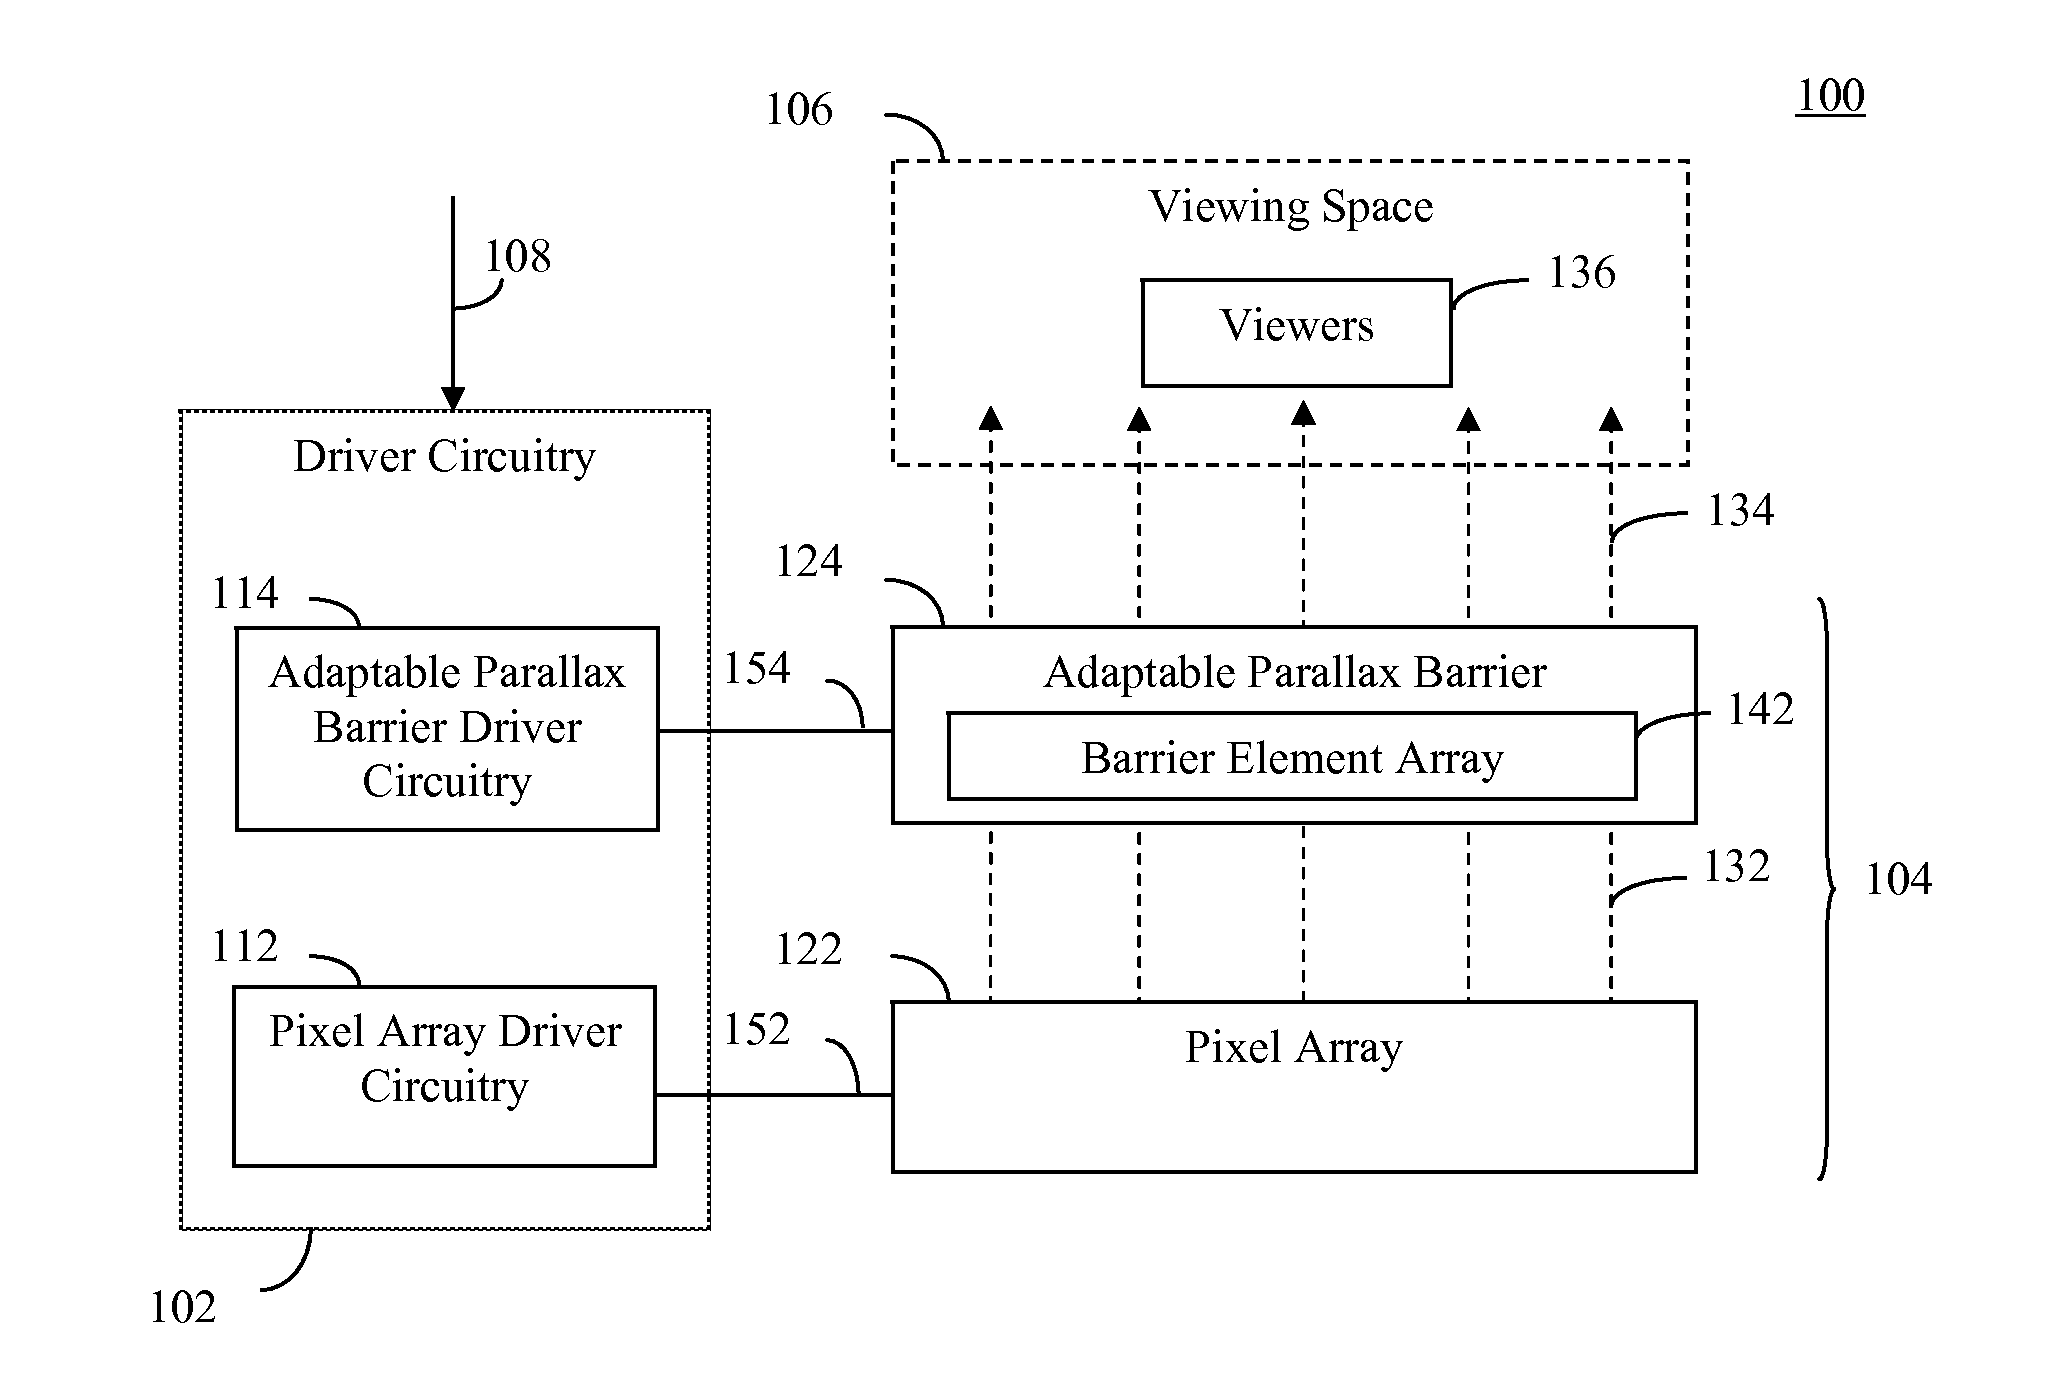 Communication infrastructure including simultaneous video pathways for multi-viewer support